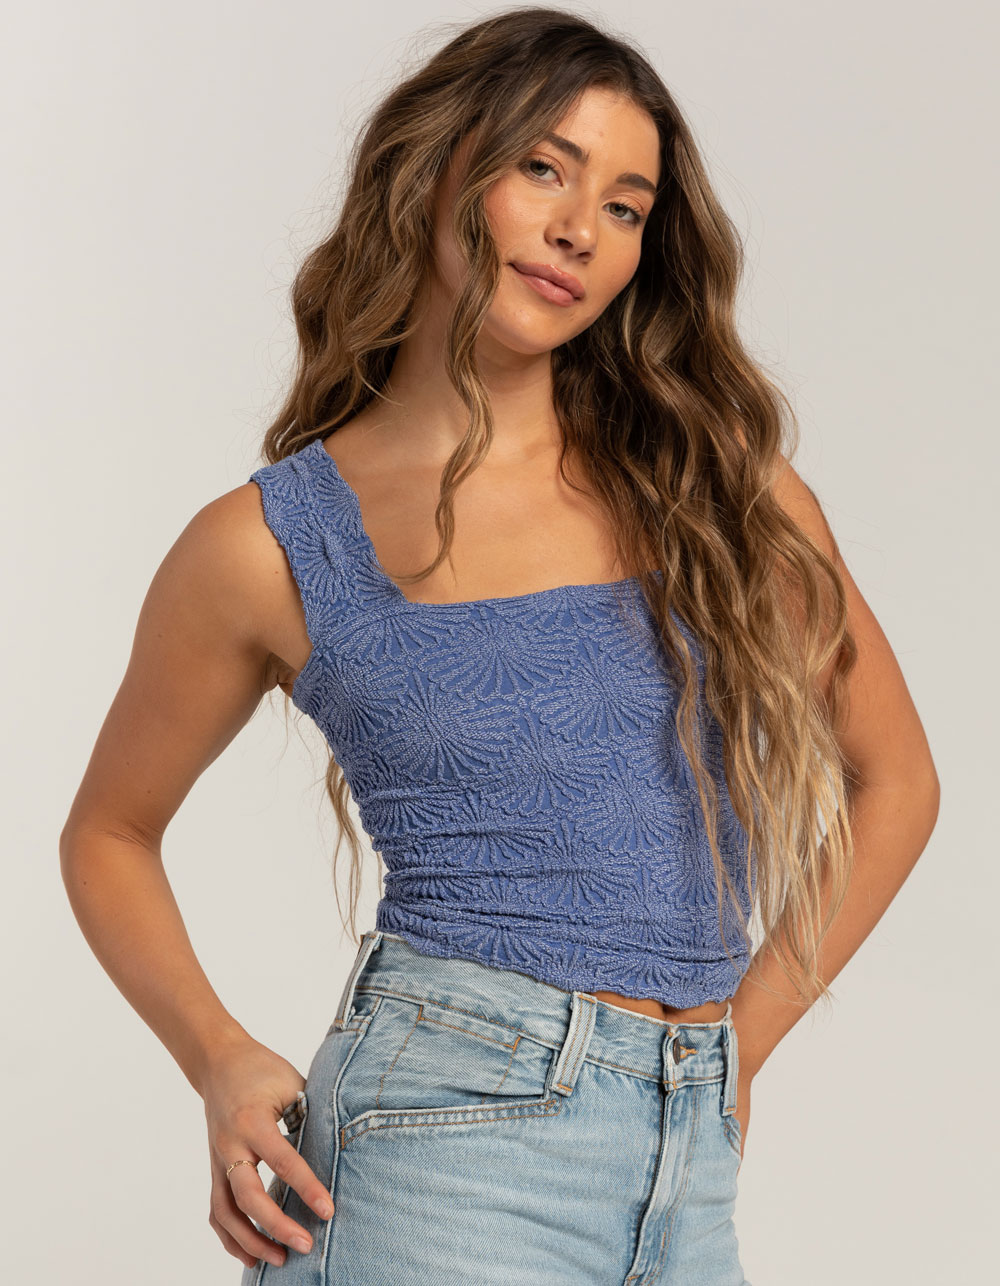 FREE PEOPLE Seamless Love Letter Womens Cami - PERIWINKLE